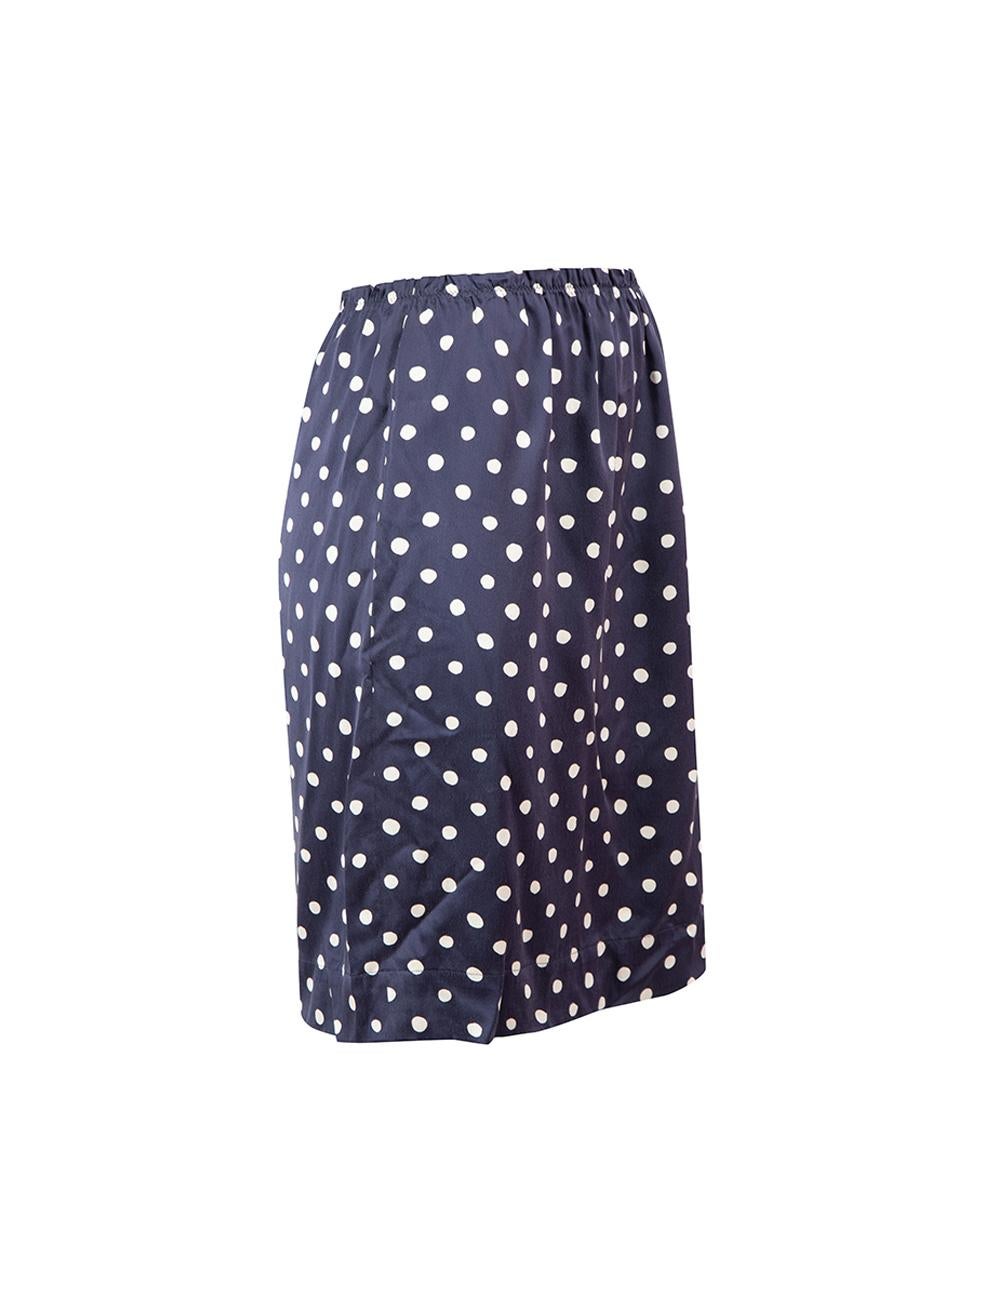 CONDITION is Never worn, with tags. Some minor wear to skirt at waist where thread ends have frayed is evident on this new Lanvin designer resale item. 



Details


Navy

Silk

Mini skirt

Polkadot pattern

Elasticated waistband

Frayed finishing